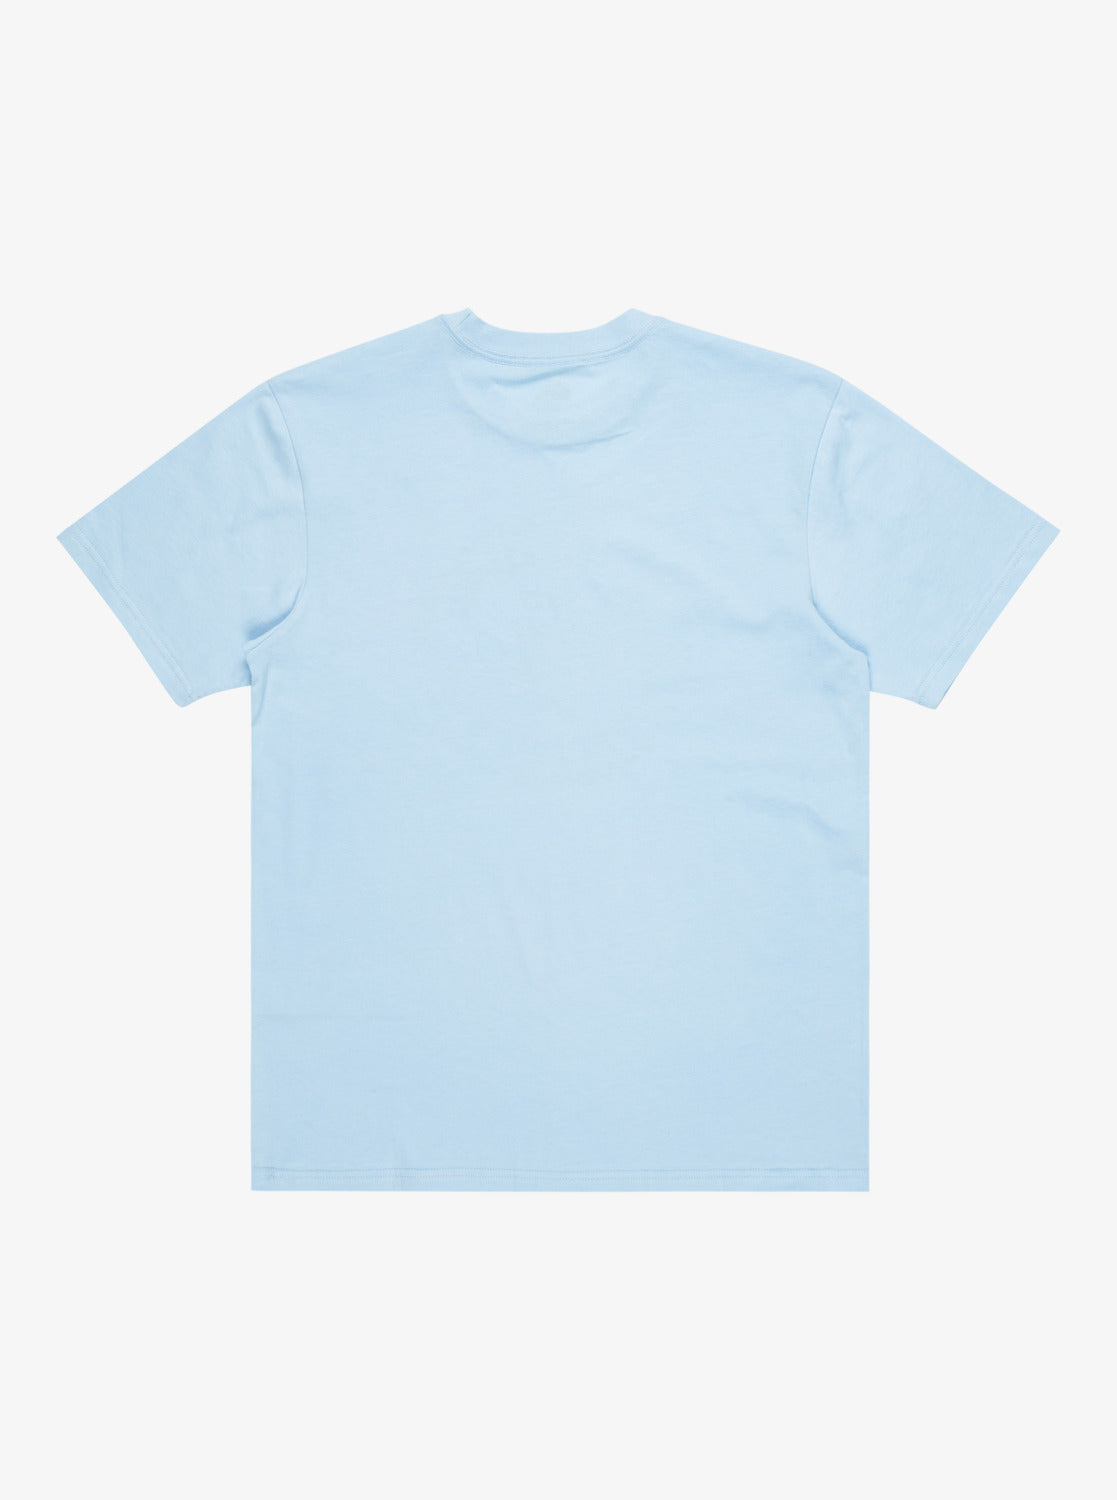 Quiksilver Fast Is Fast T-Shirt in Blue Bell